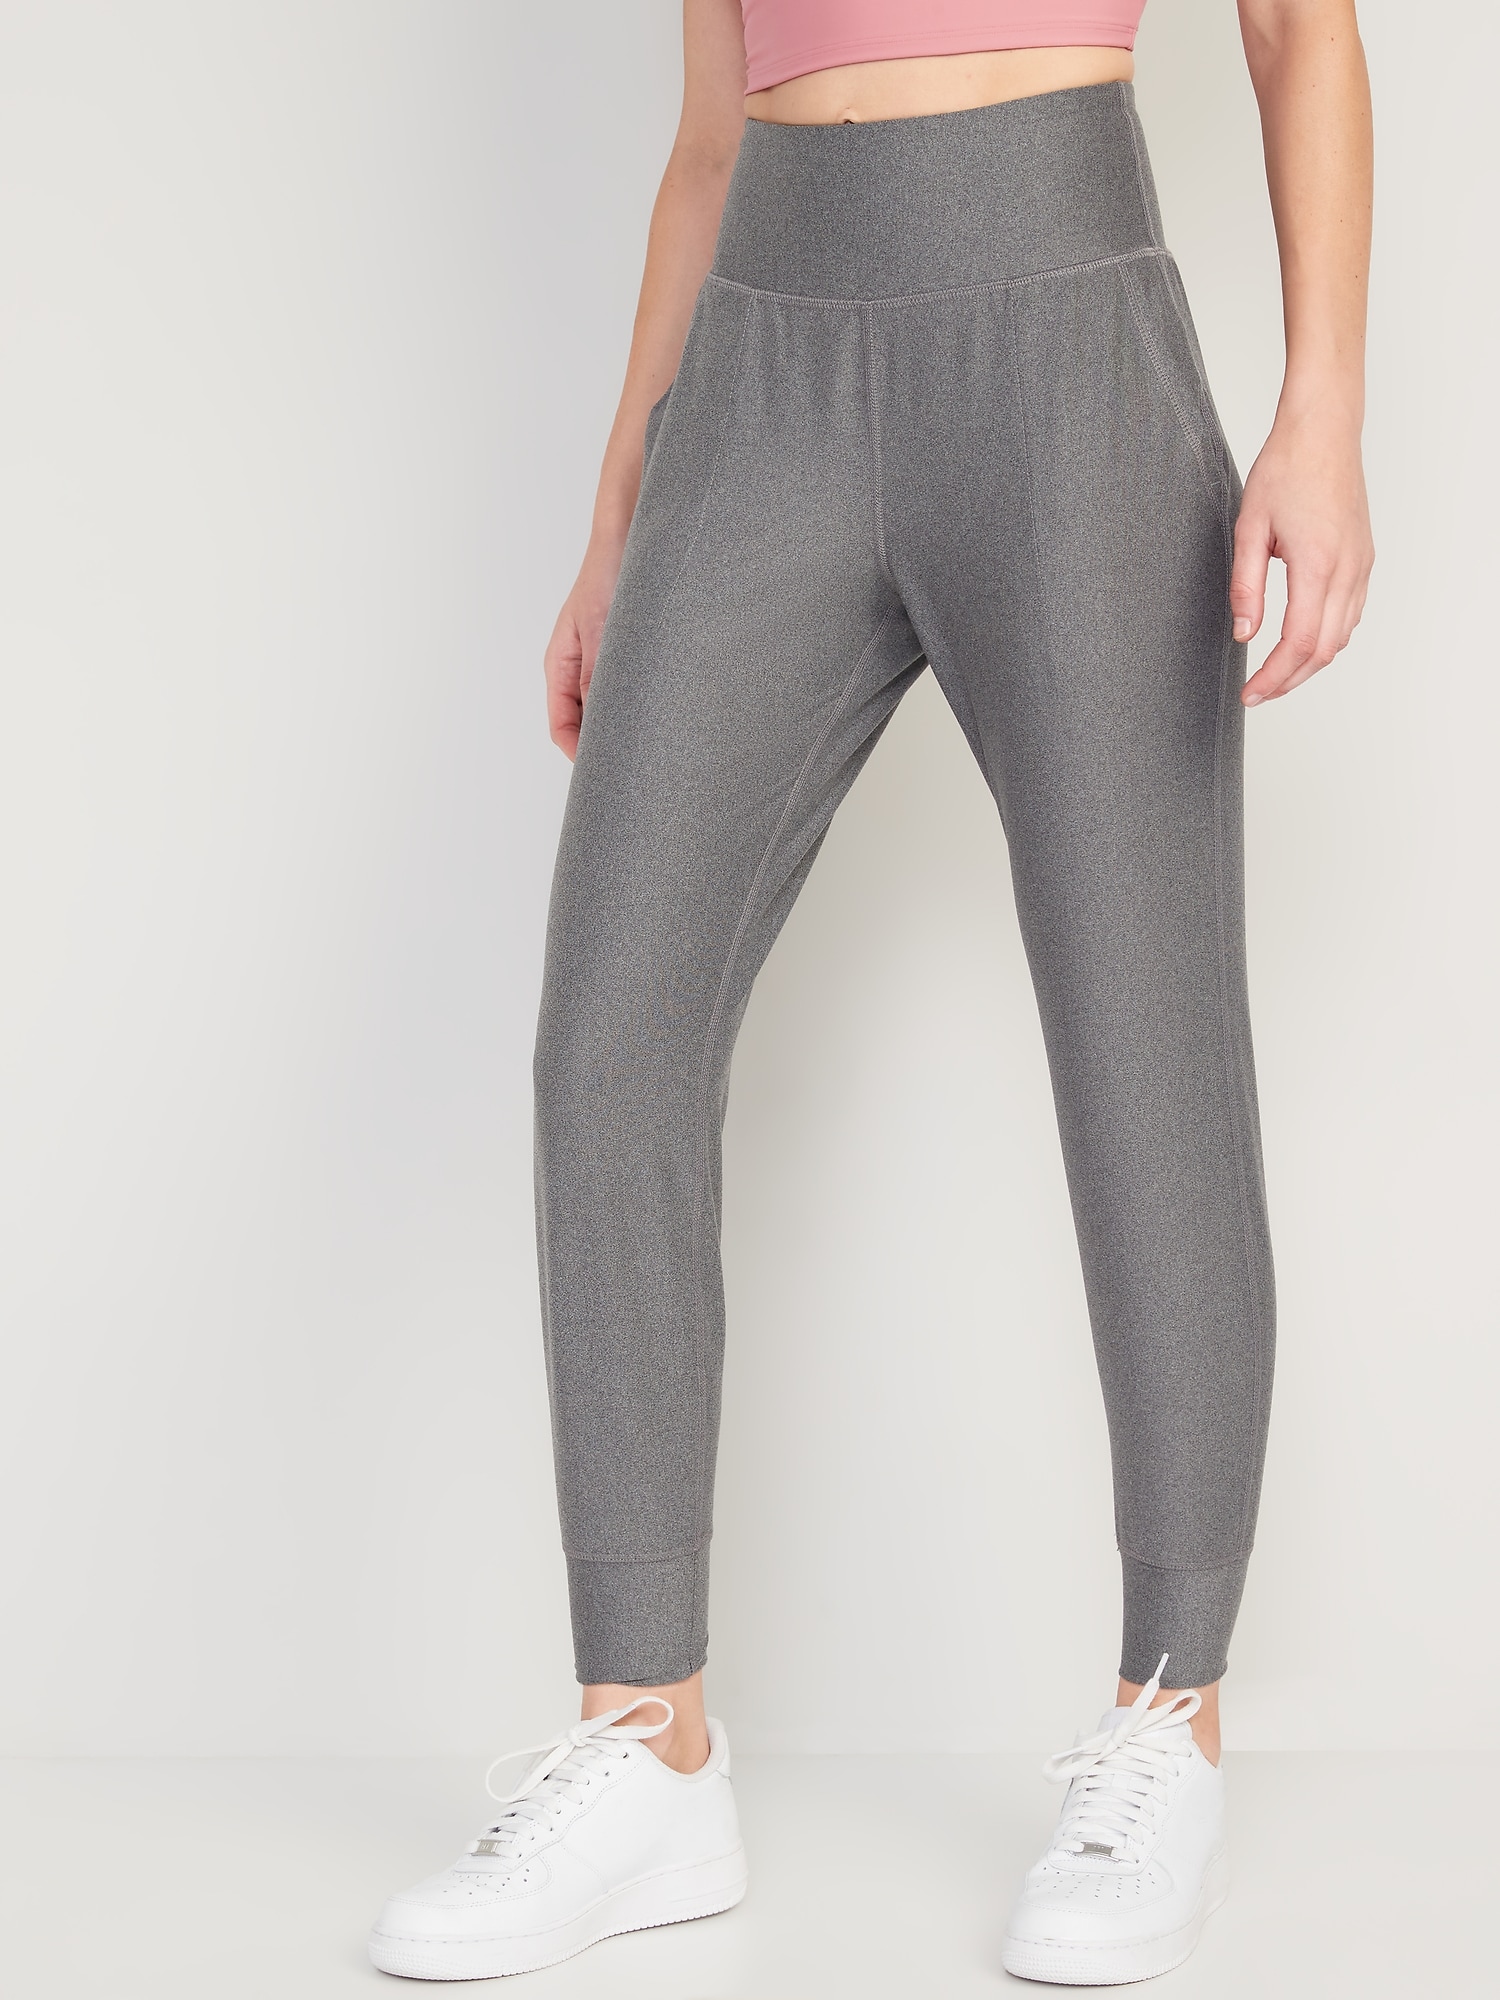 Today Only! Old Navy Women's Powersoft Joggers $18 or Men's Go Dry Track  Pants $12